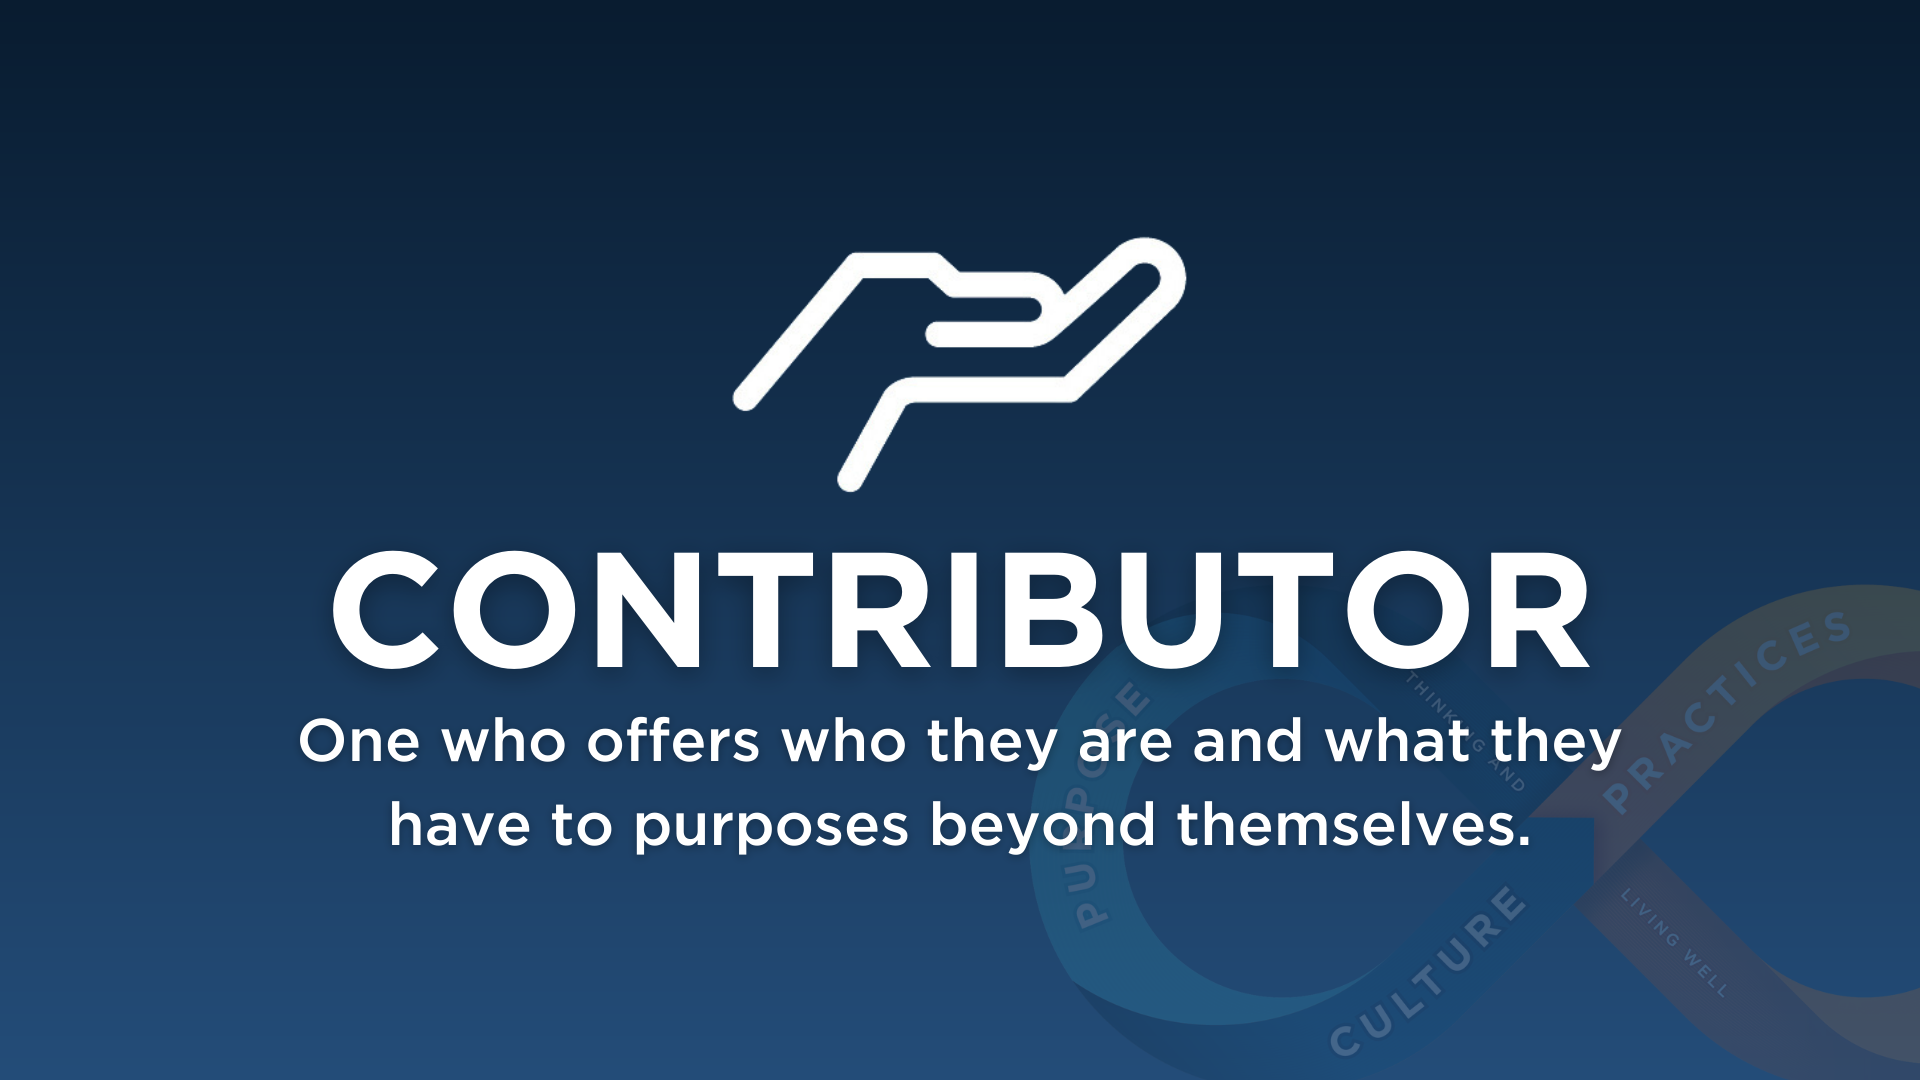 graphic for Contributor - One who offers who they are and what they have to purposes beyond themselves.